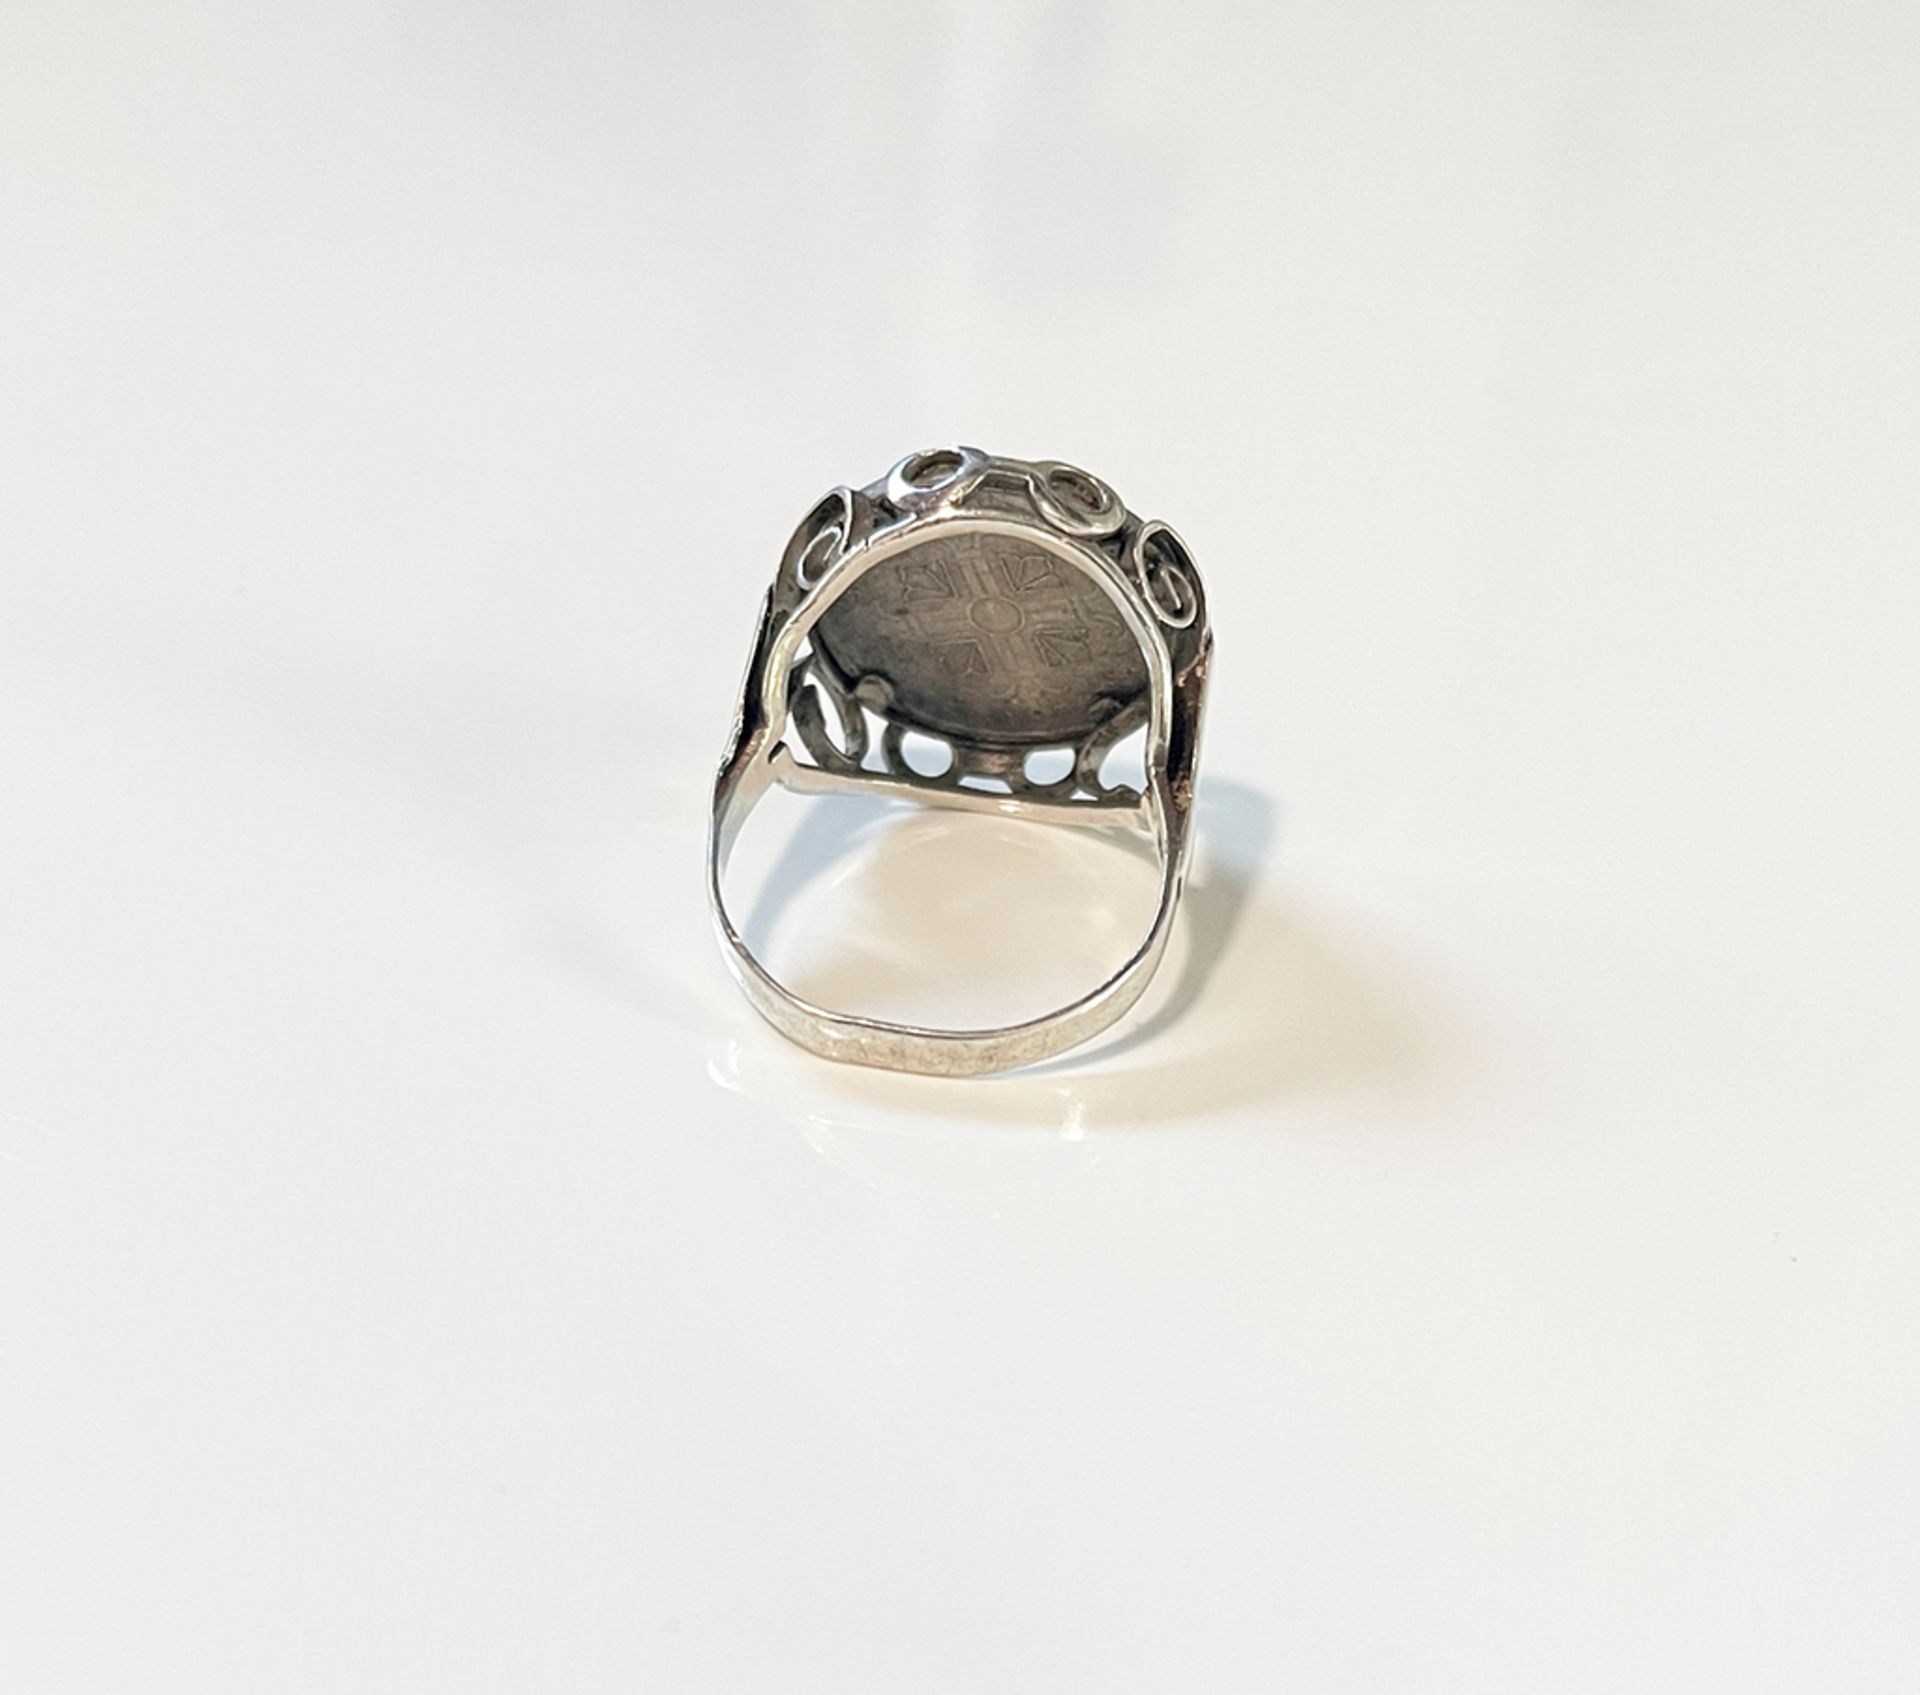 Silver ring with a Kennedy Coin - Image 4 of 4